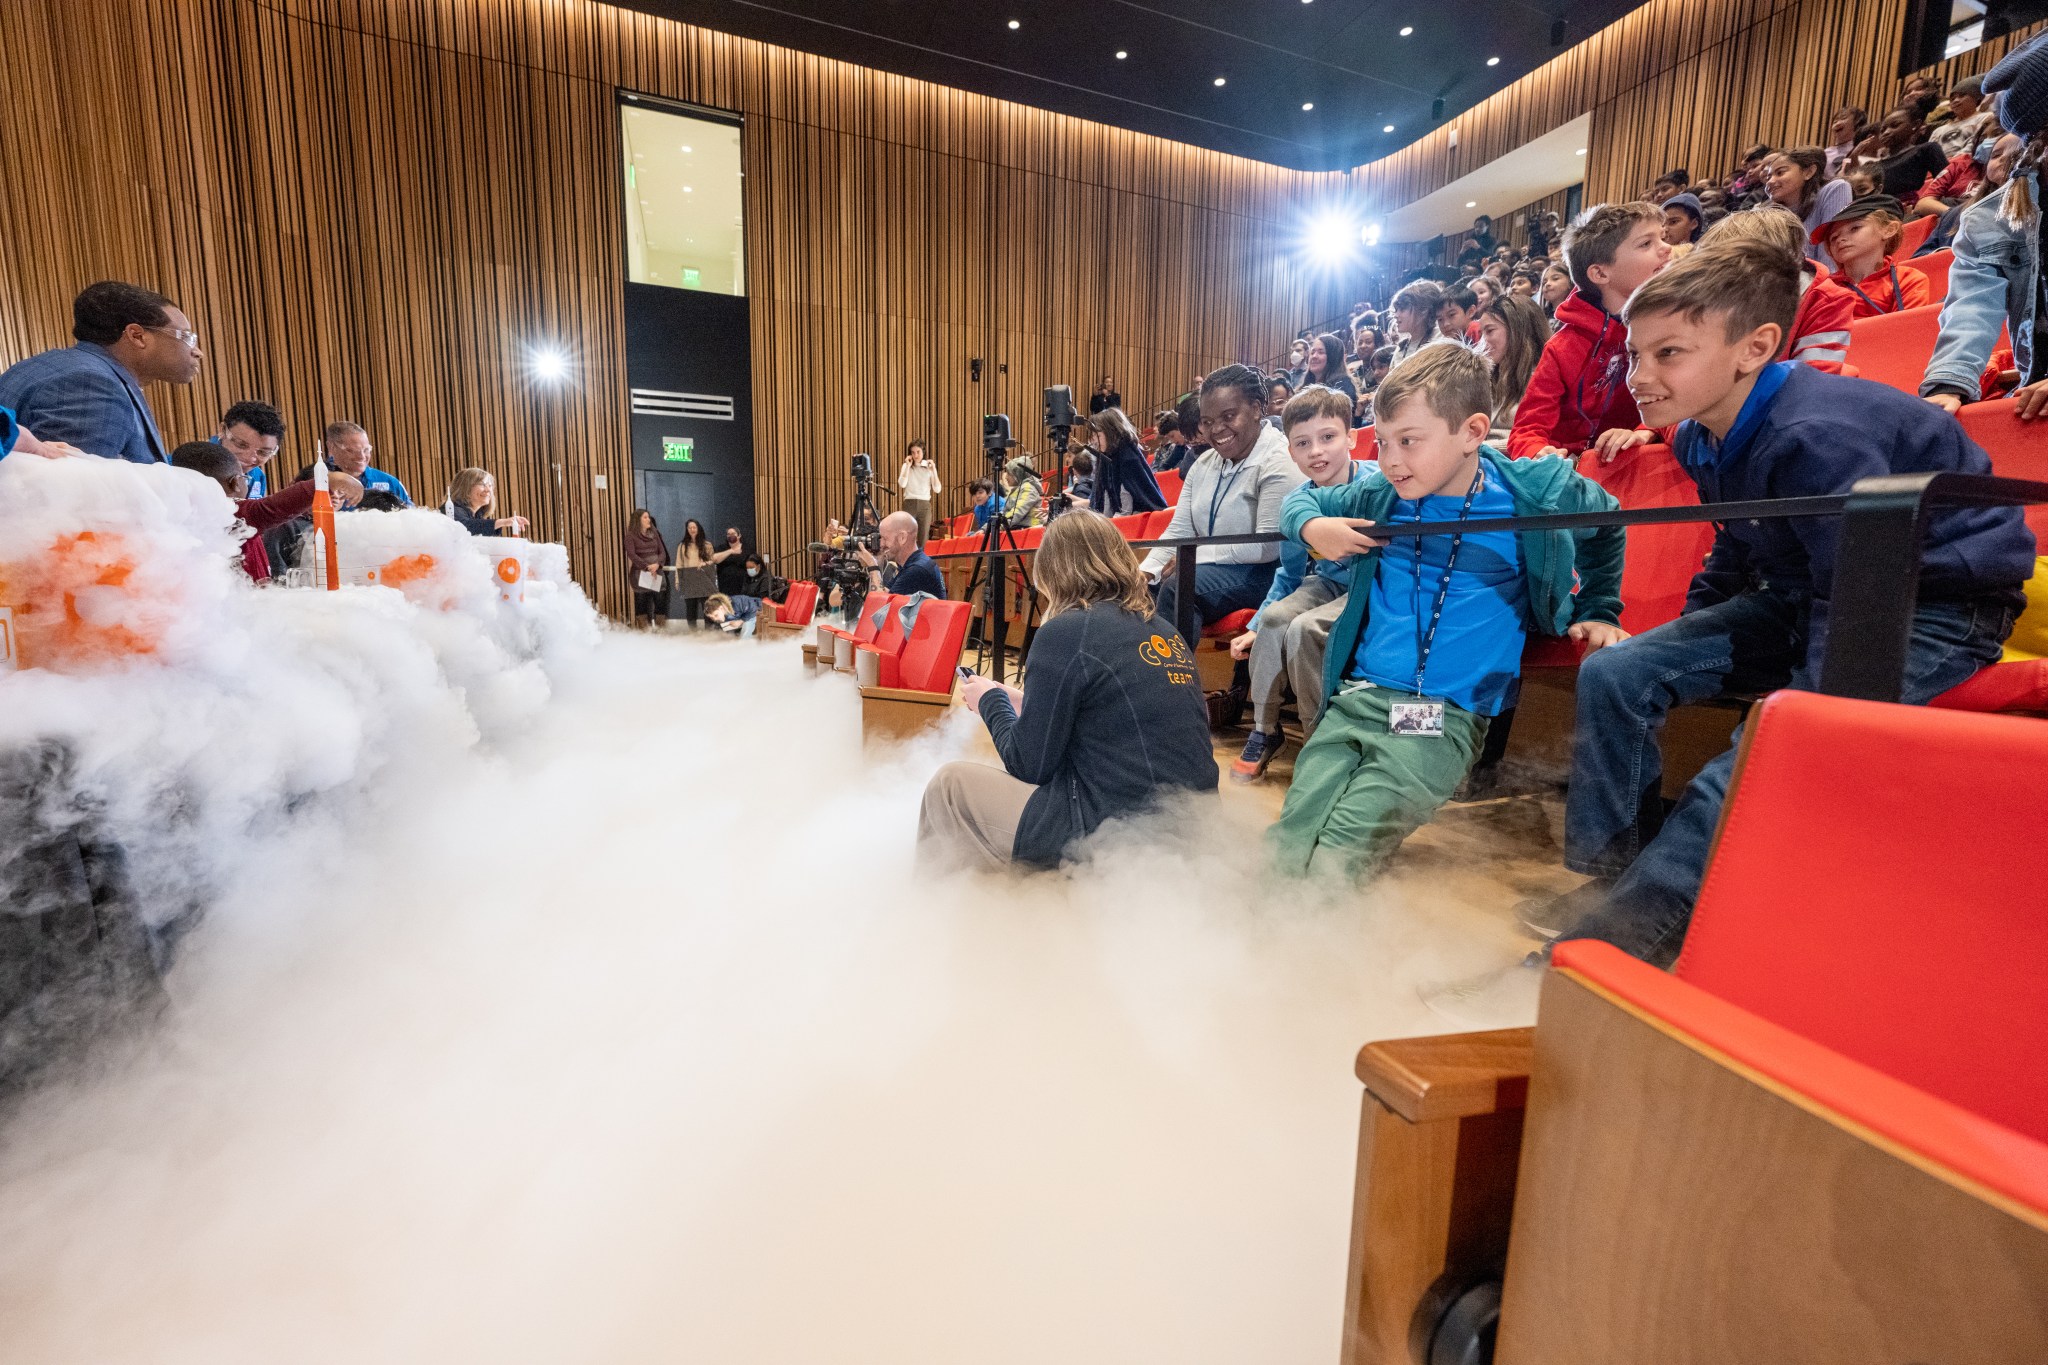 Fog rolls across the floor of an auditorium full of students and teachers. In the background at left are NASA astronauts Jessica Watkins and Bob Hines, along with students and teachers. To the right are rows of orange seats, where the audience sits, watching the experiment underway.